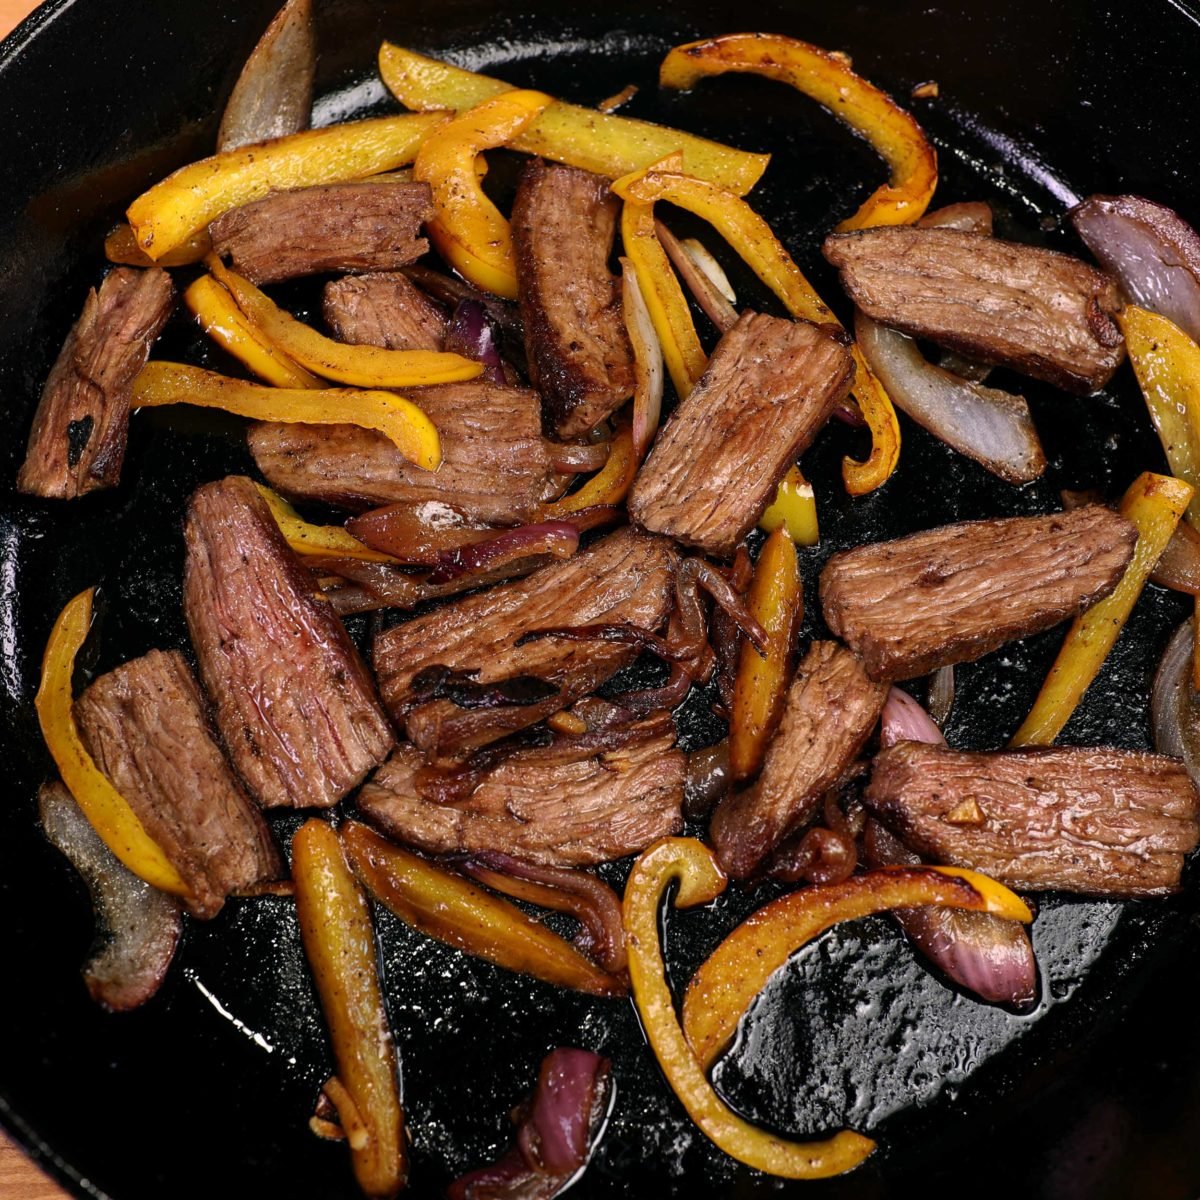 slices of steak, yellow peppers, and onions in a cast iron skillet.